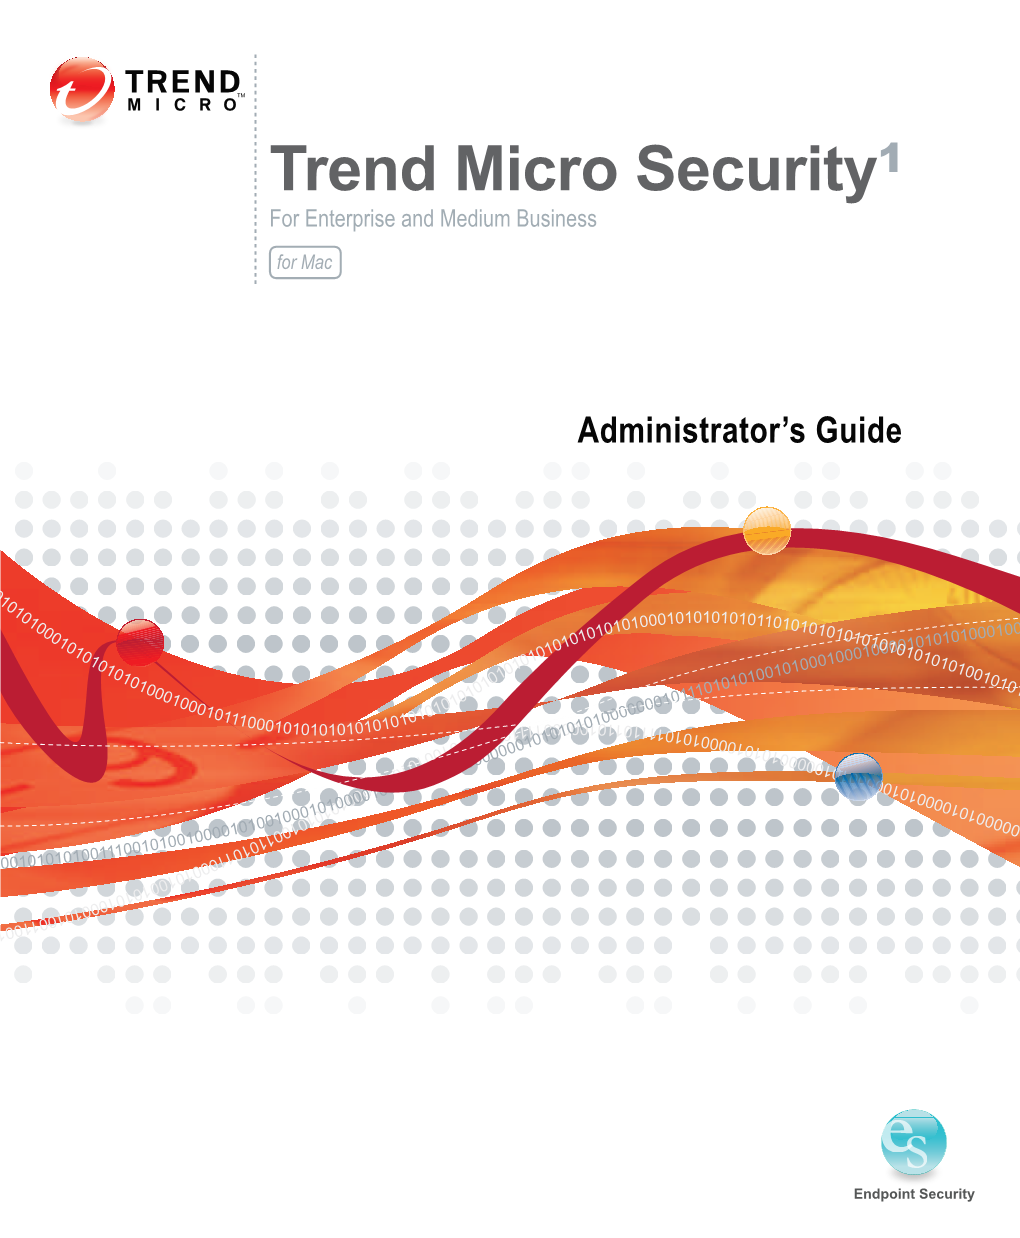 Trend Micro Security (For Mac) Administrator's Guide